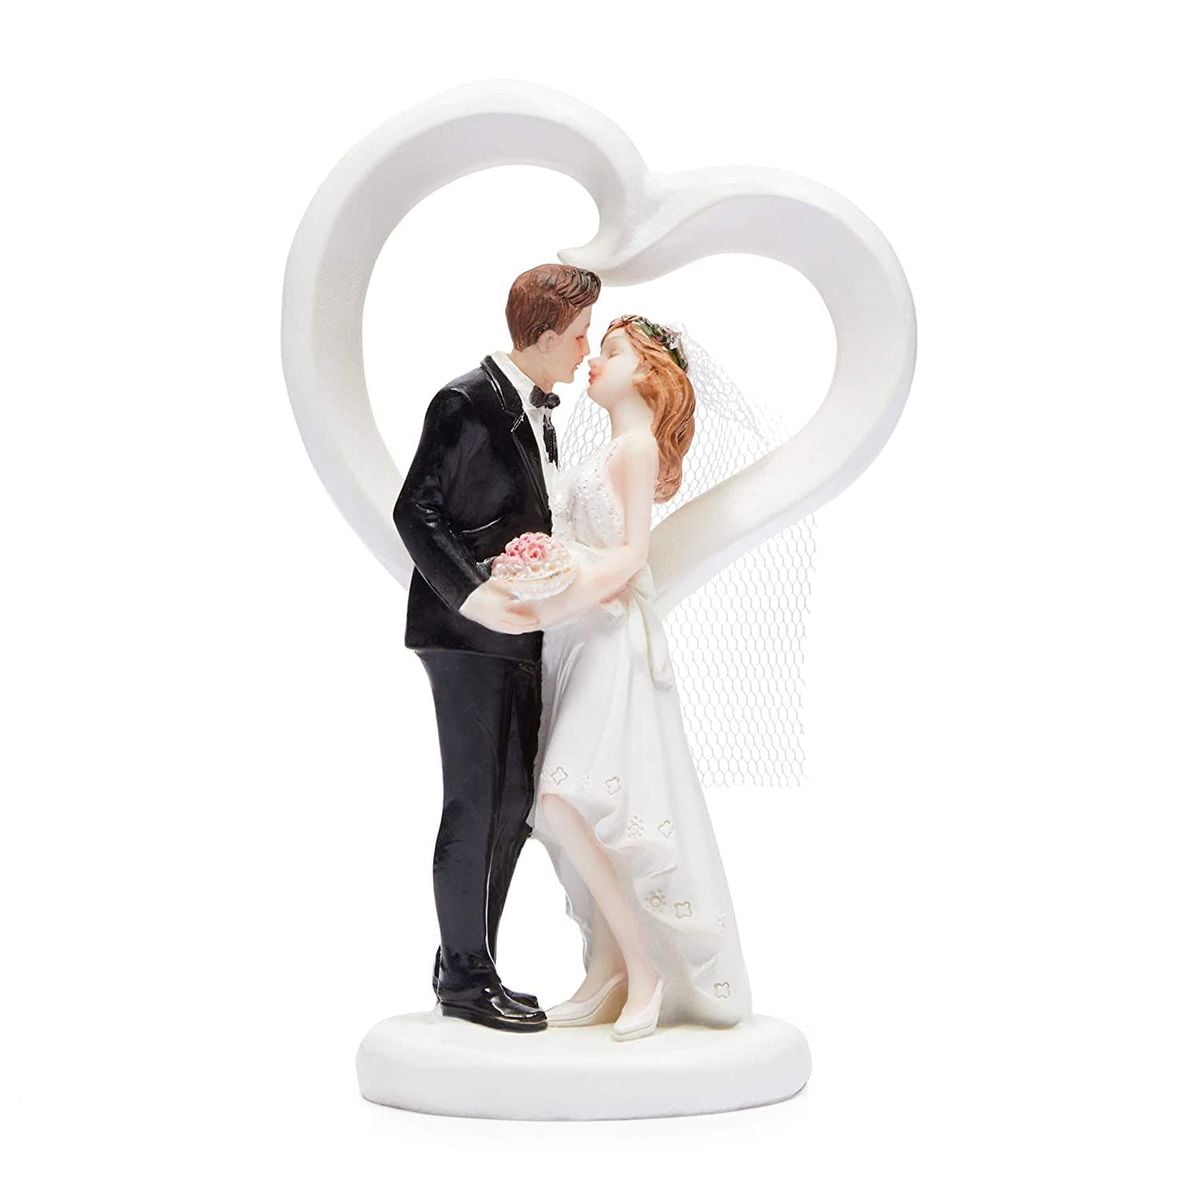 Silhouette Heart Leaning Bride Groom Kissing Acrylic Wedding Cake Toppe MADE Inr 